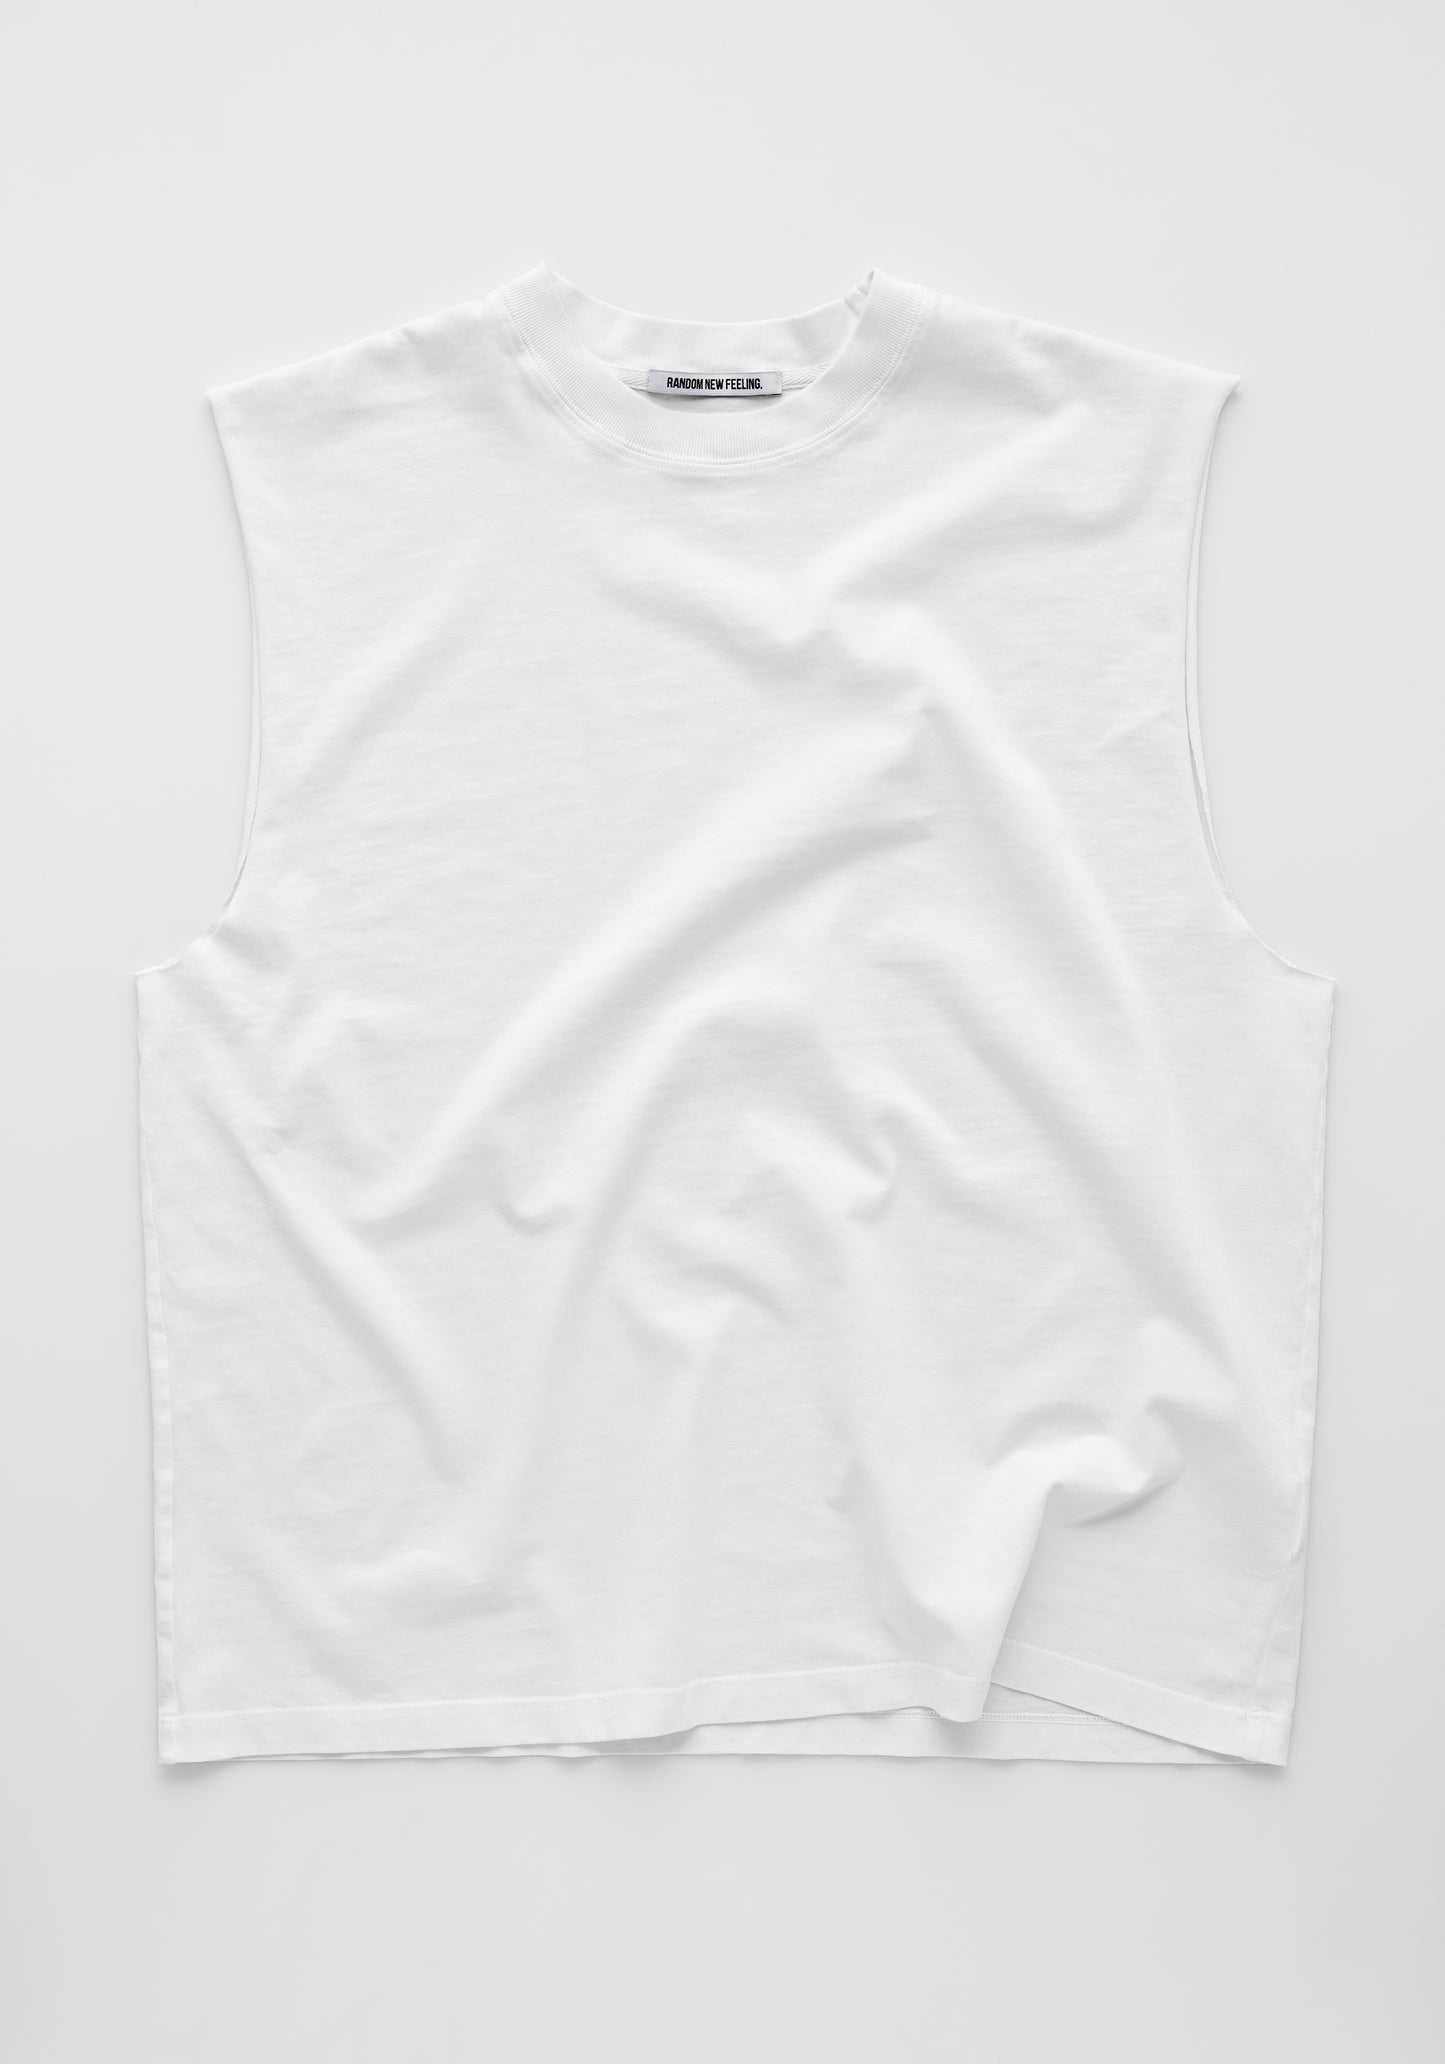 BODY FIT CUT-OFF TEE, WHITE